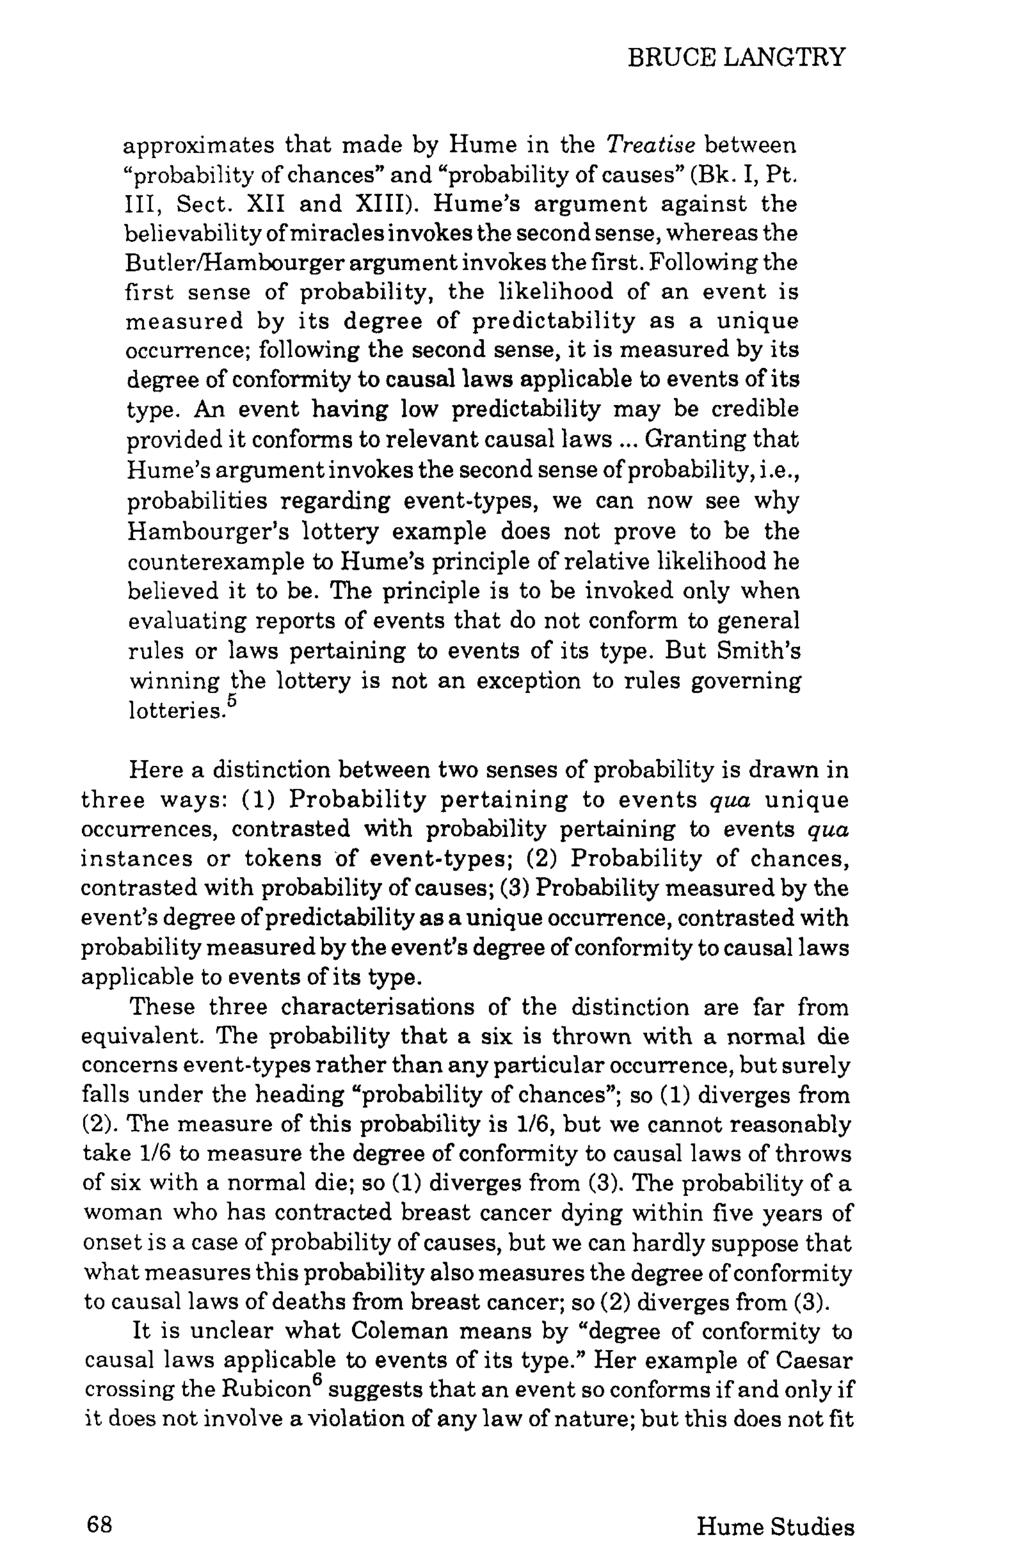 BRUCE LANGTRY approximates that made by Hume in the Treatise between probability of chances and probability of causes (Bk. I, Pt. 111, Sect. XI1 and XIII).